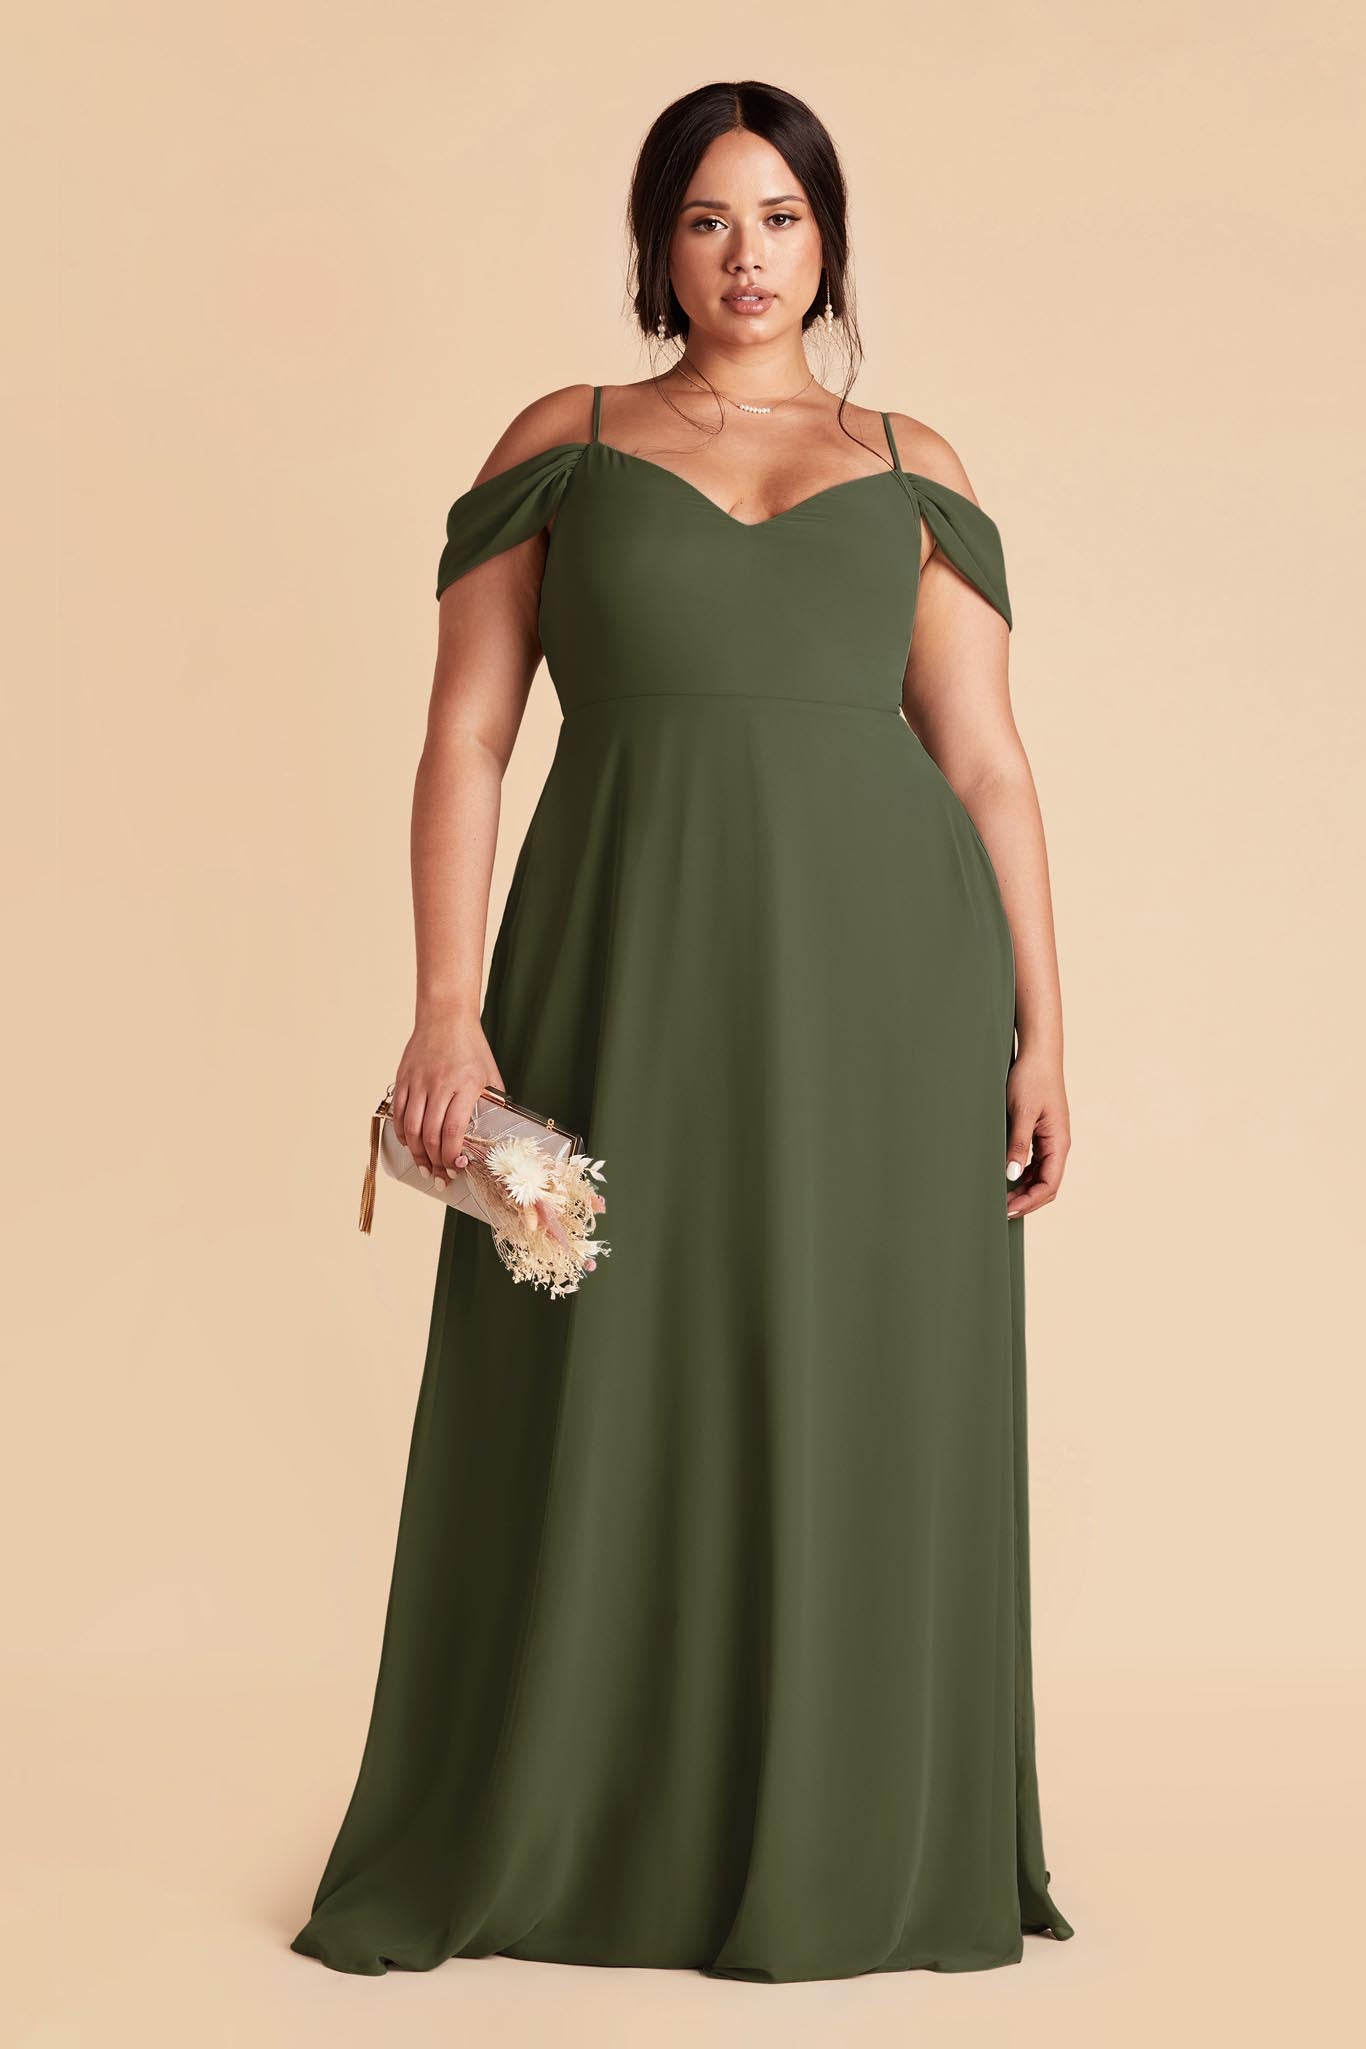 Olive Devin Convertible Dress by Birdy Grey